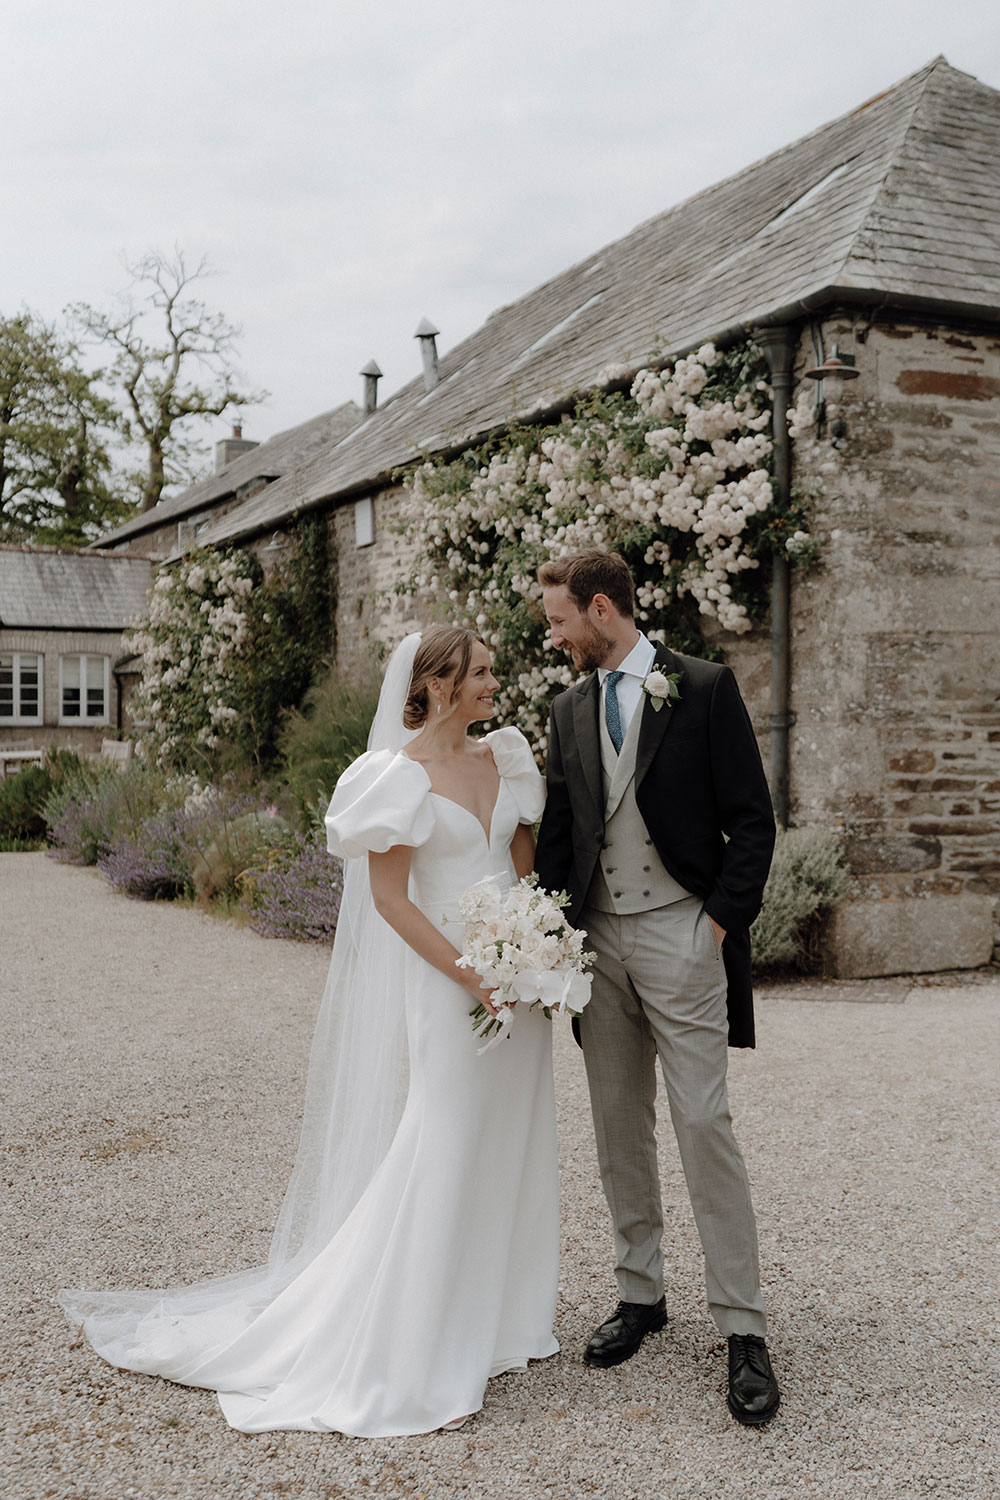 Hannah in Suzanne Neville Calla for a beautiful wedding at